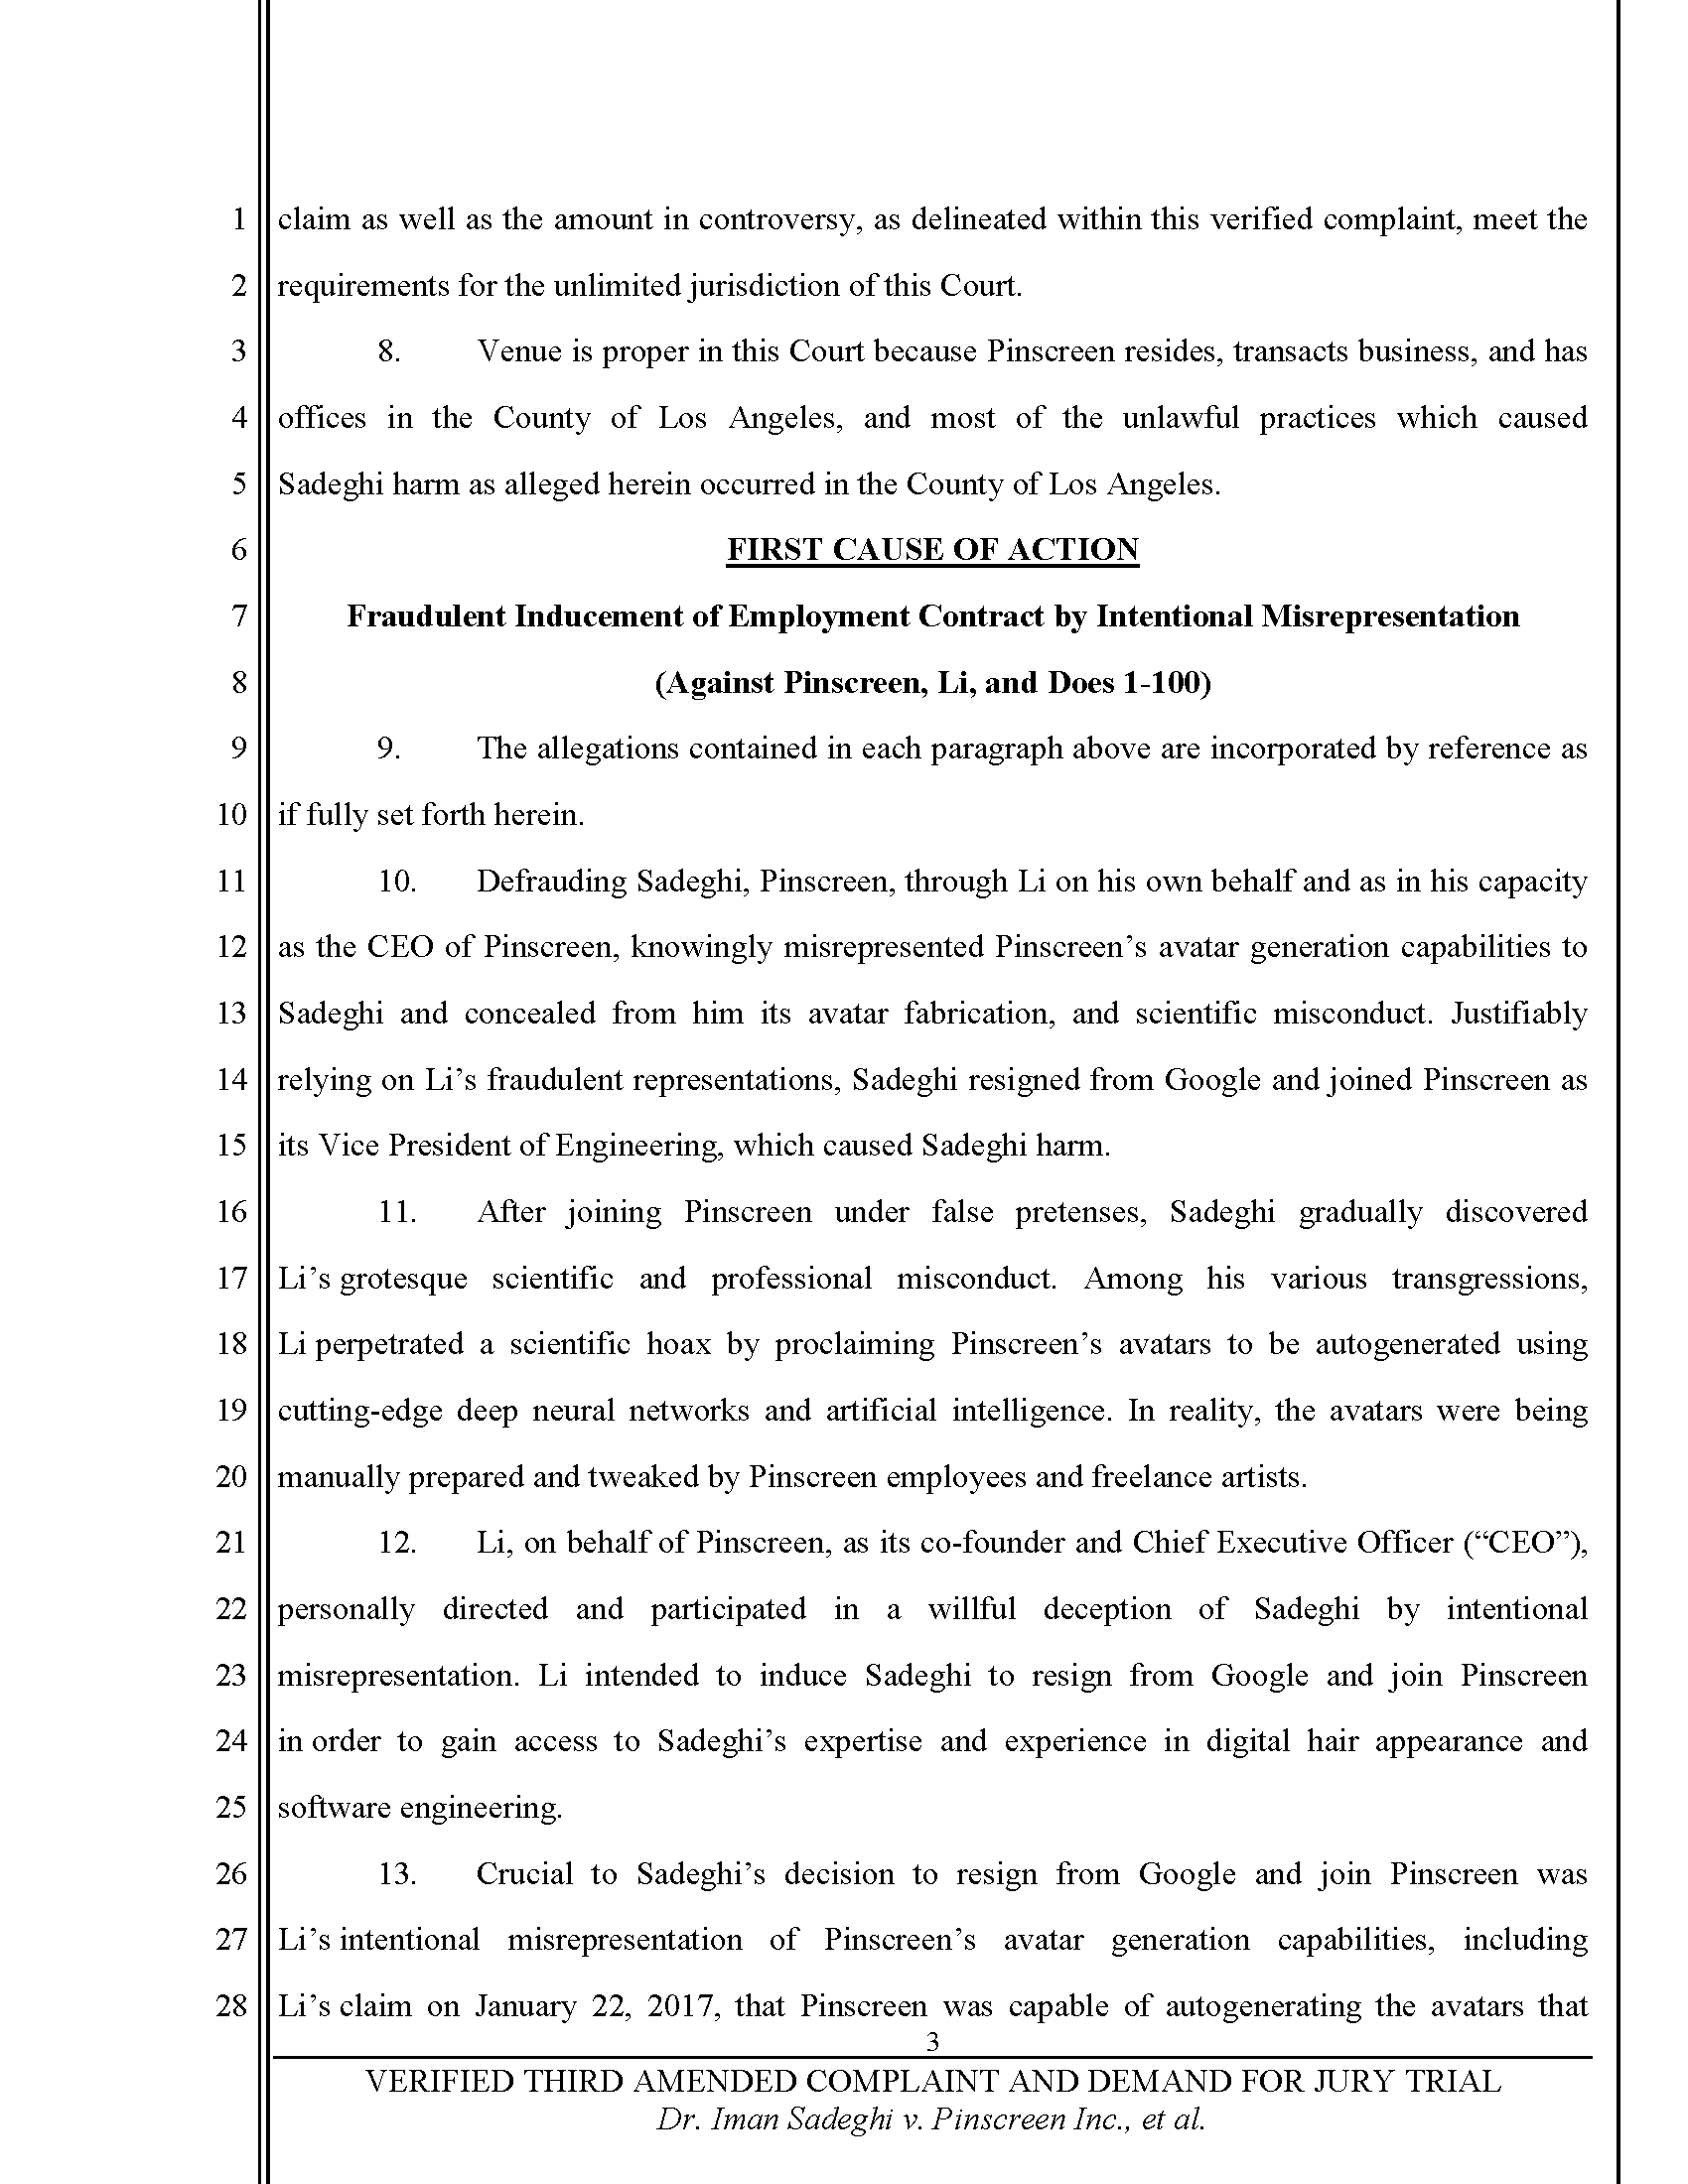 Third Amended Complaint (TAC) Page 4